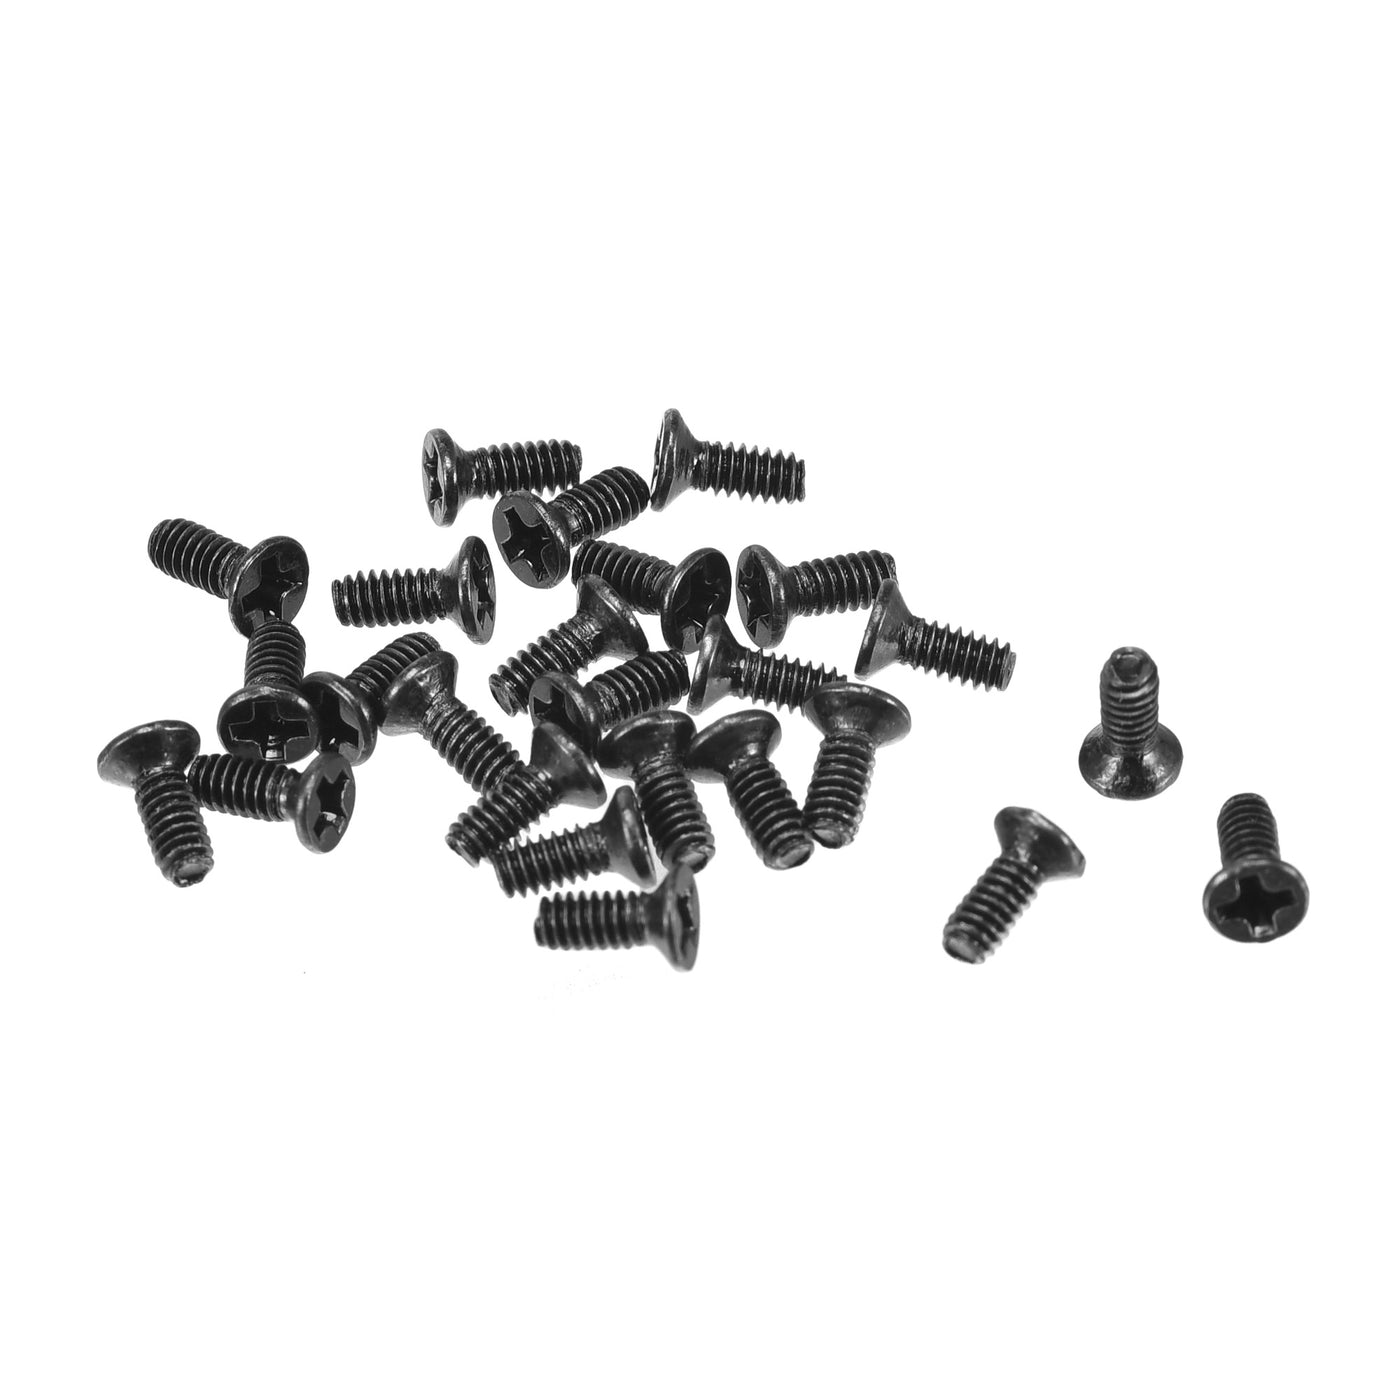 uxcell Uxcell M2 x 5mm Phillips Flat Head Screws Carbon Steel Machine Screws Black for Home Office Computer Case Appliance Equipment 350pcs